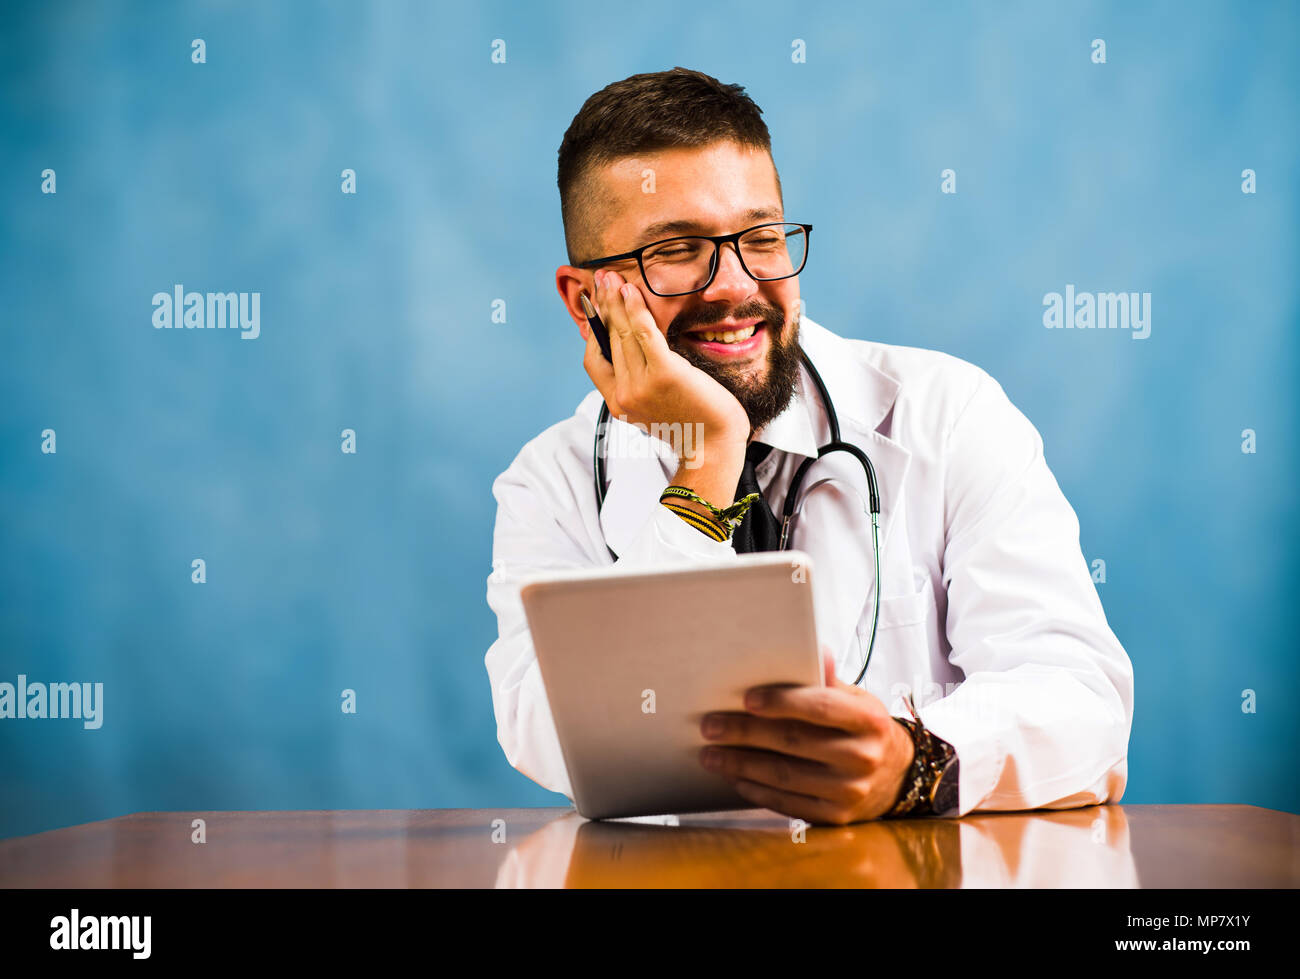 Male doctor holding digital tablet in office 24 Banque D'Images